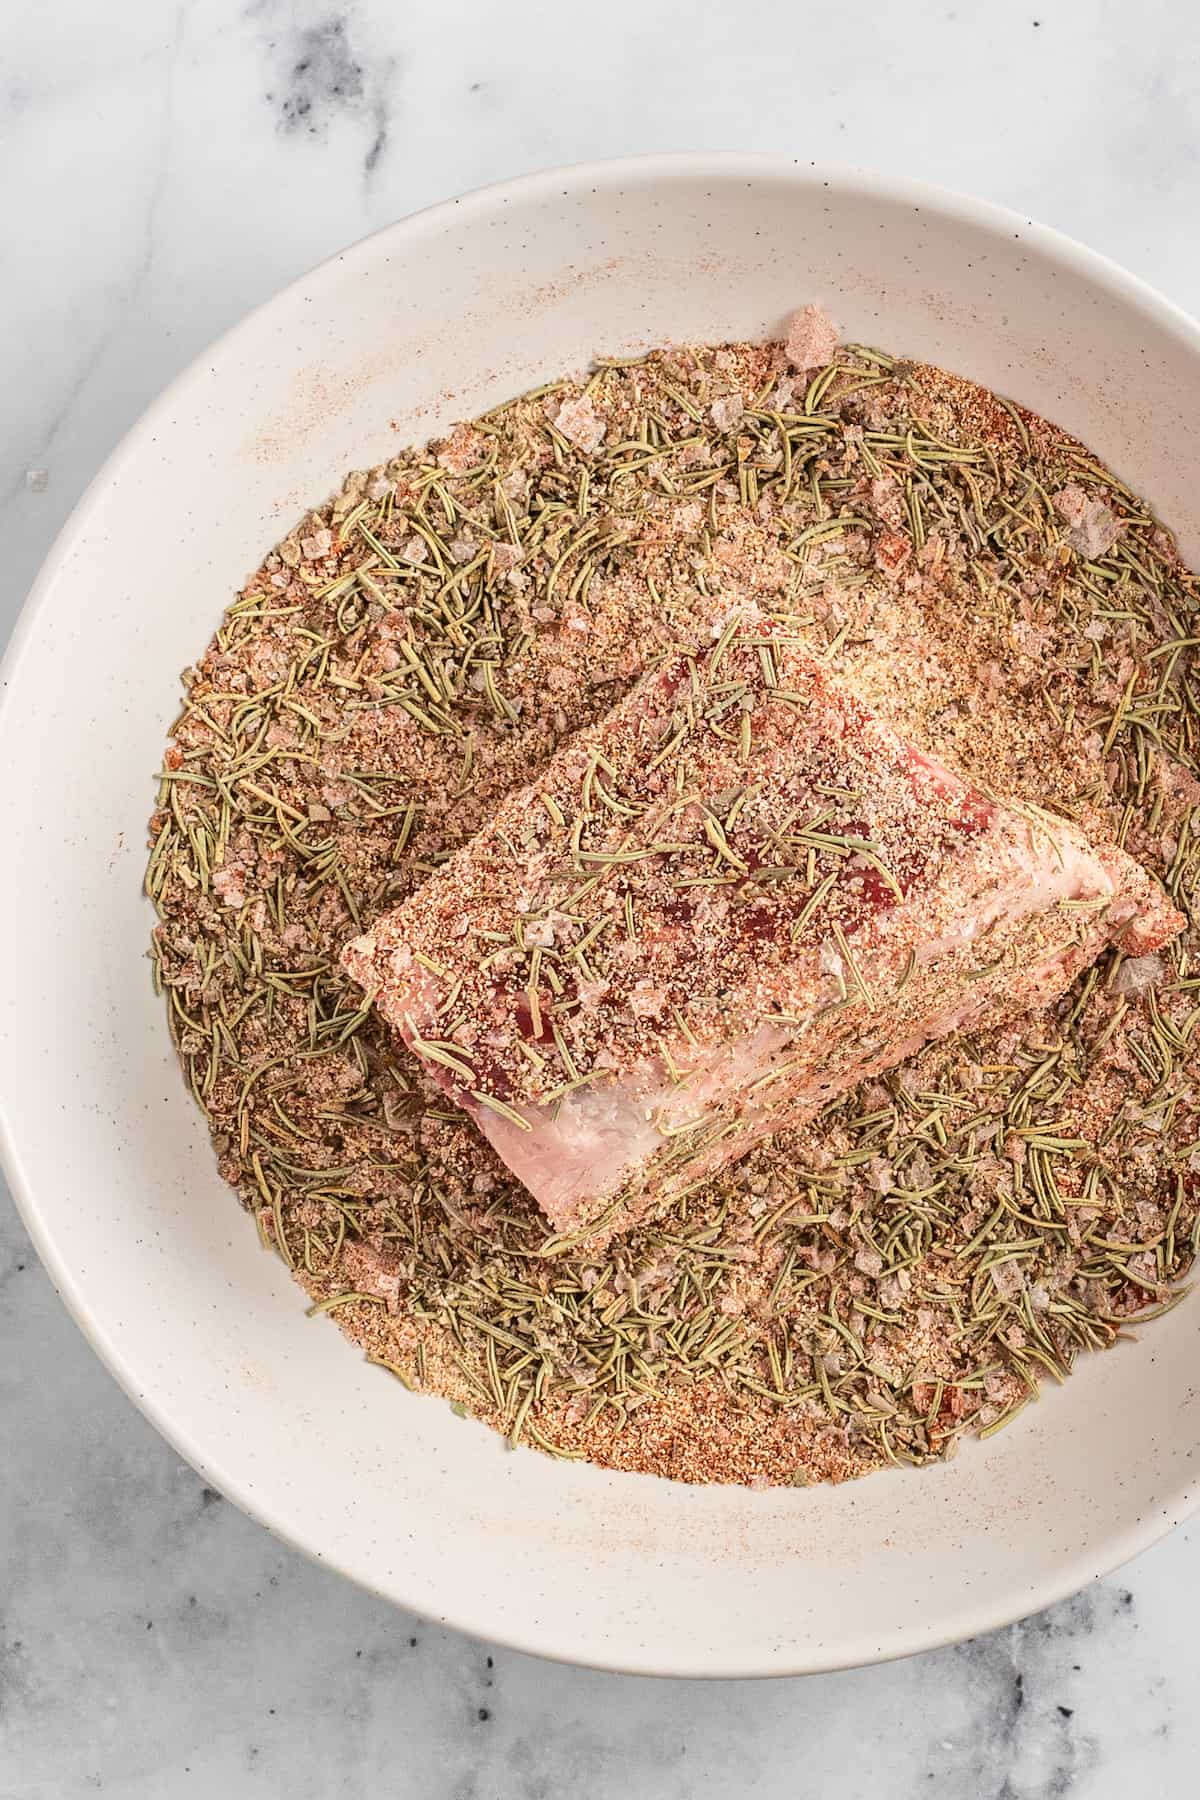 coating short rib pieces with dry spice mixture